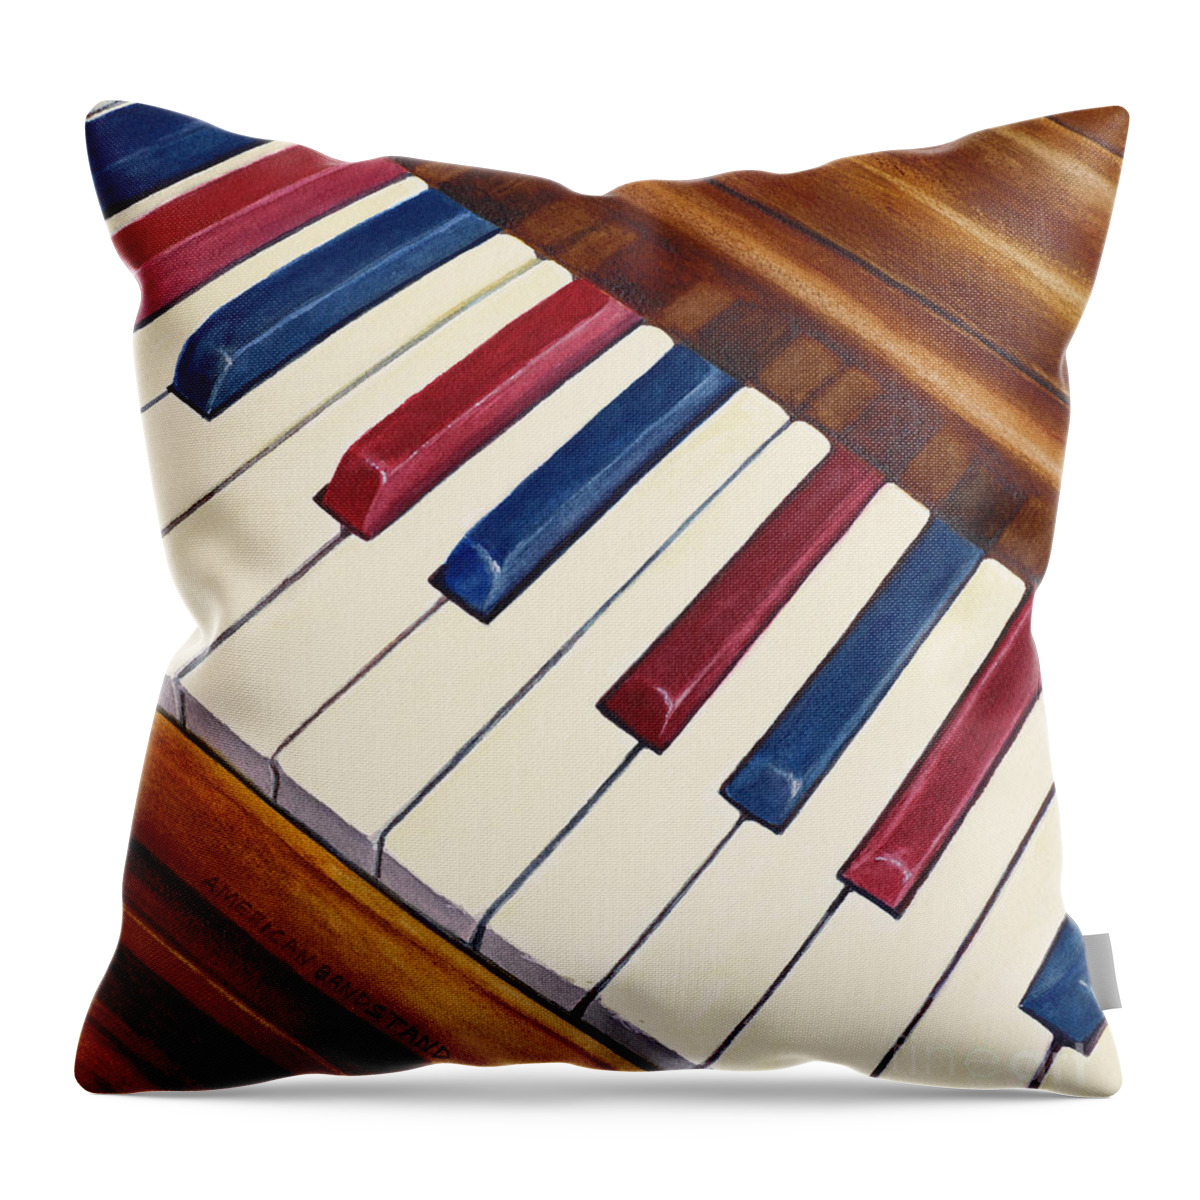 Piano Throw Pillow featuring the painting American Bandstand by Karen Fleschler